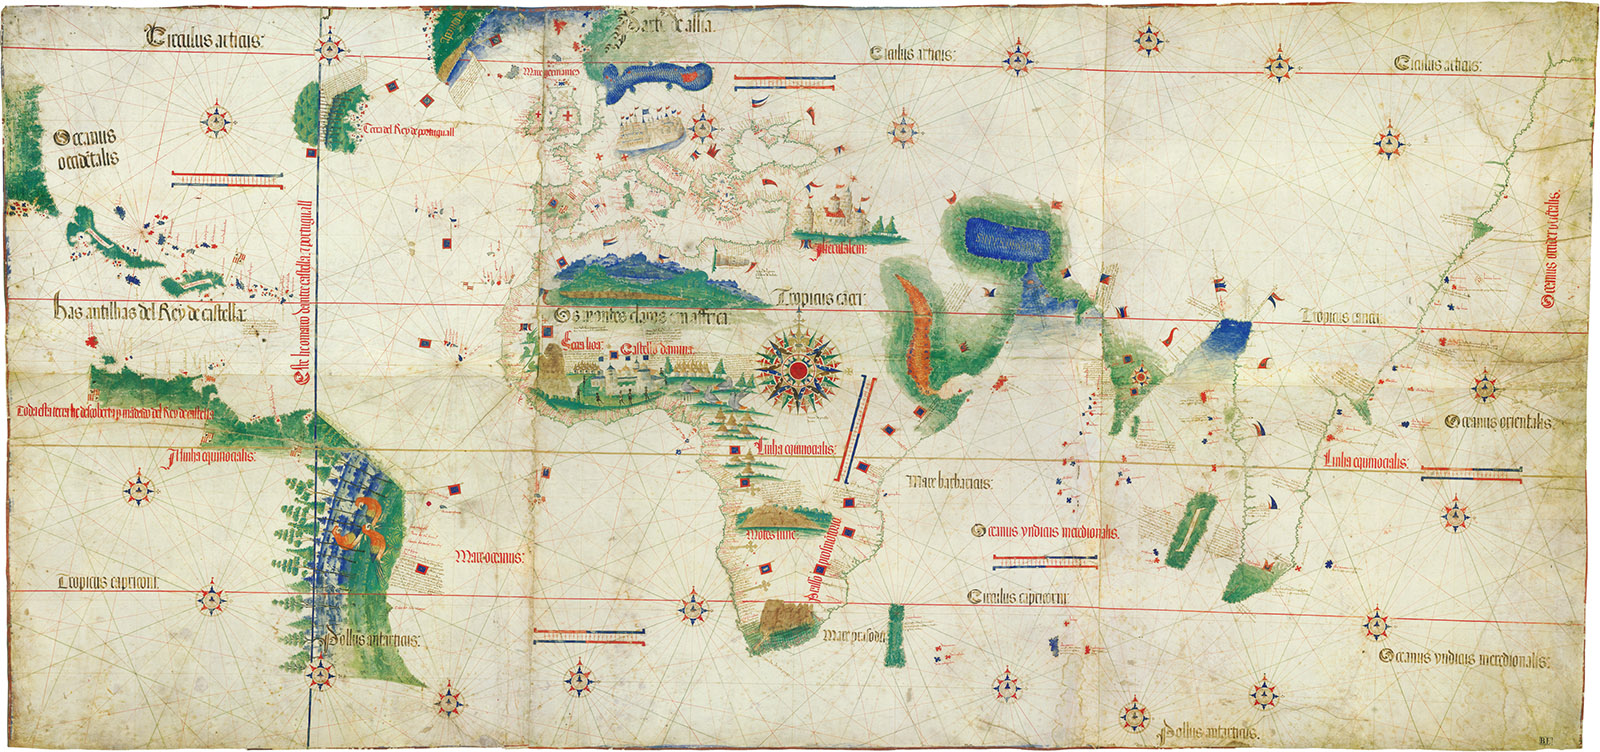 The Cantino planisphere, a map of the known world made in Portugal, 1502